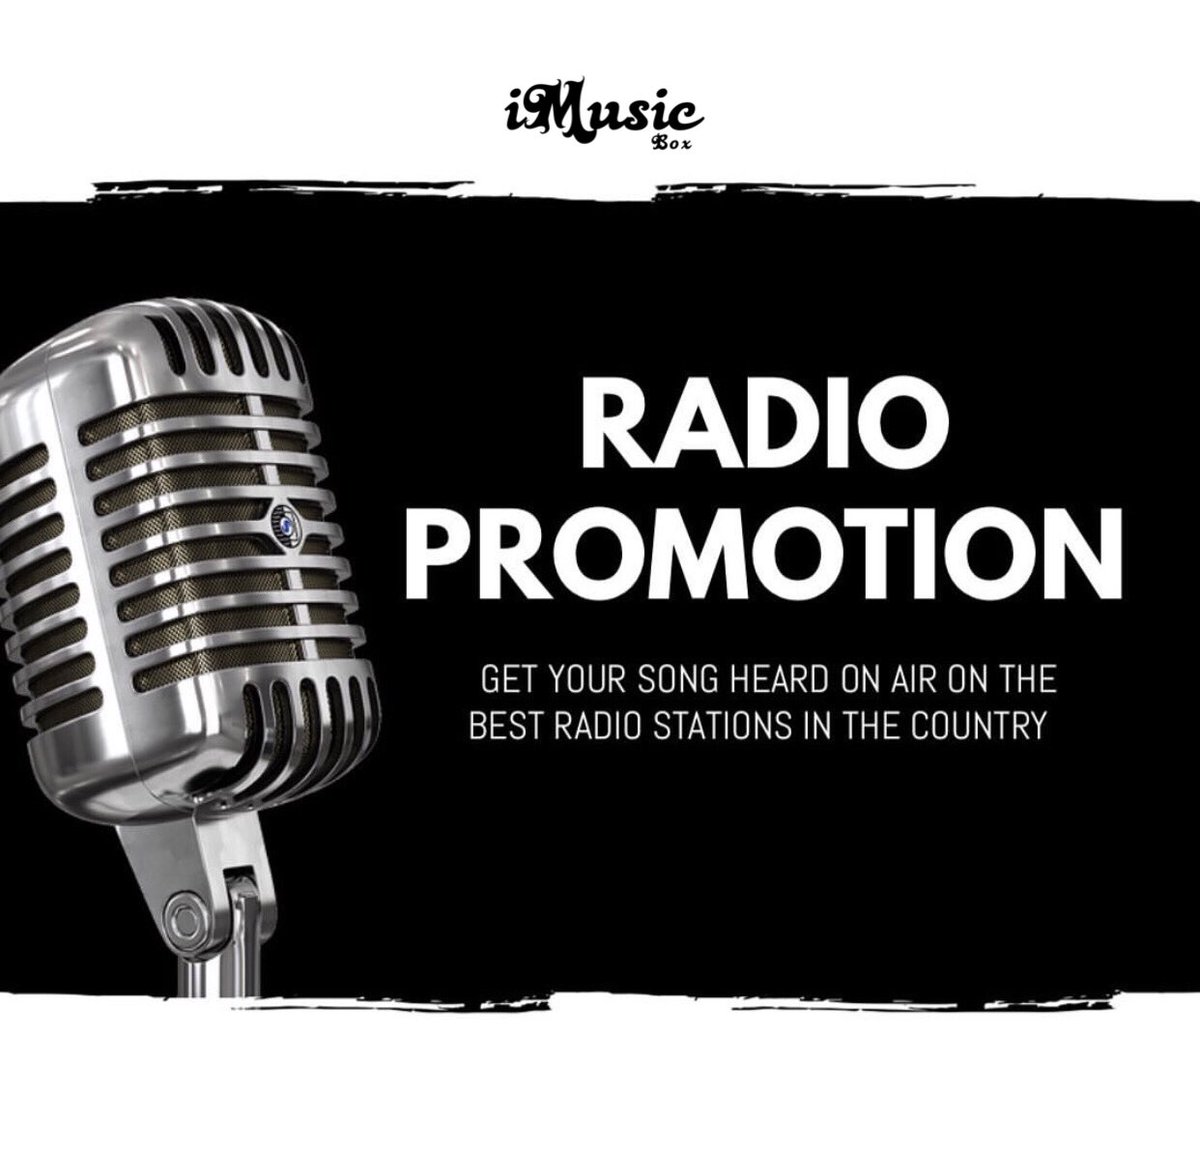 Dear Artist,

Get your song heard on AIR on the best Radio Stations in the country

#iMusicBox #RadioPromotion